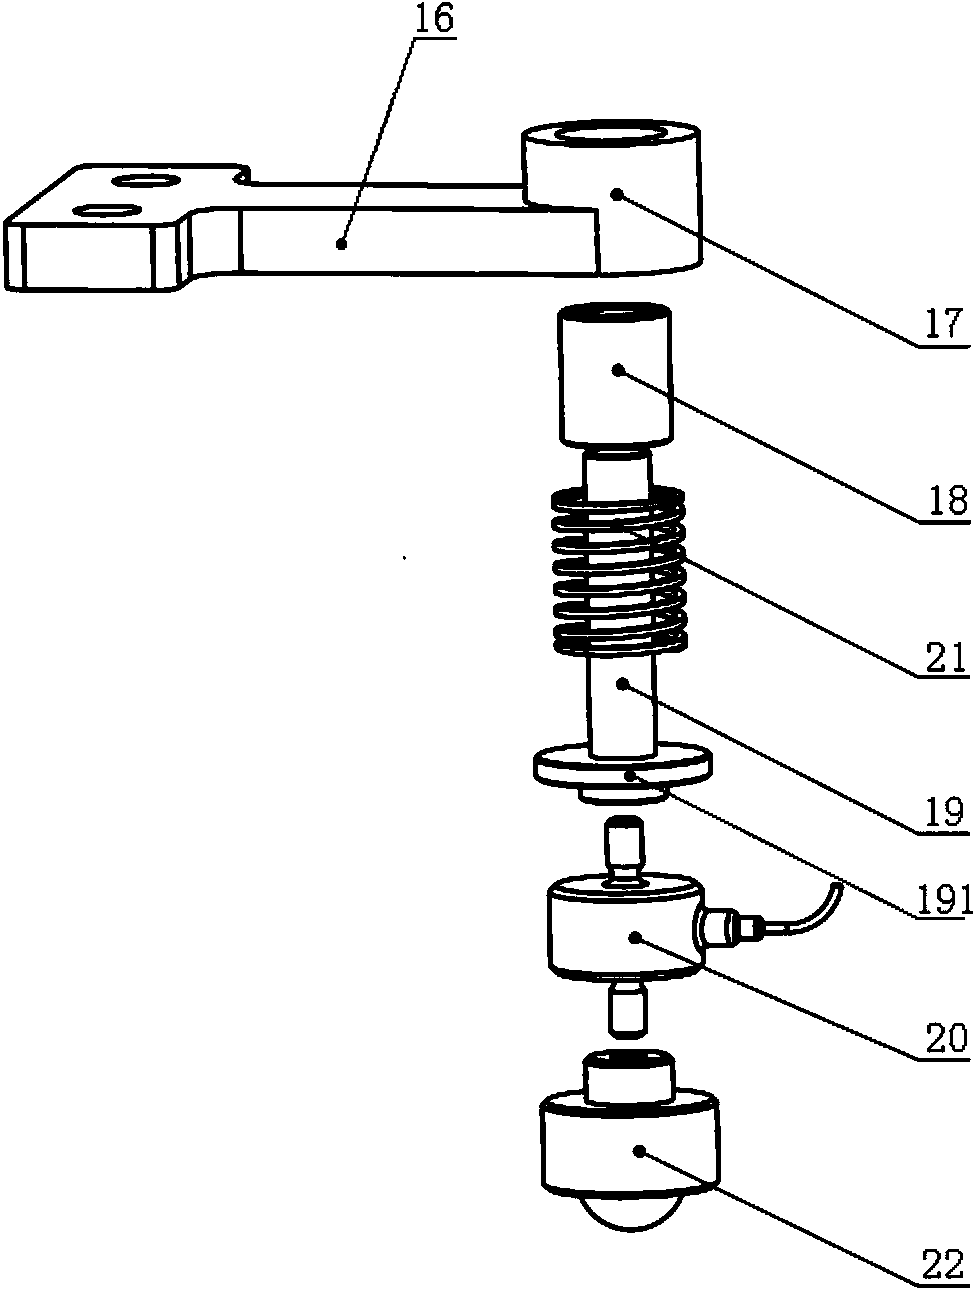 Device for measuring rotational inertia and friction moment of ball screw